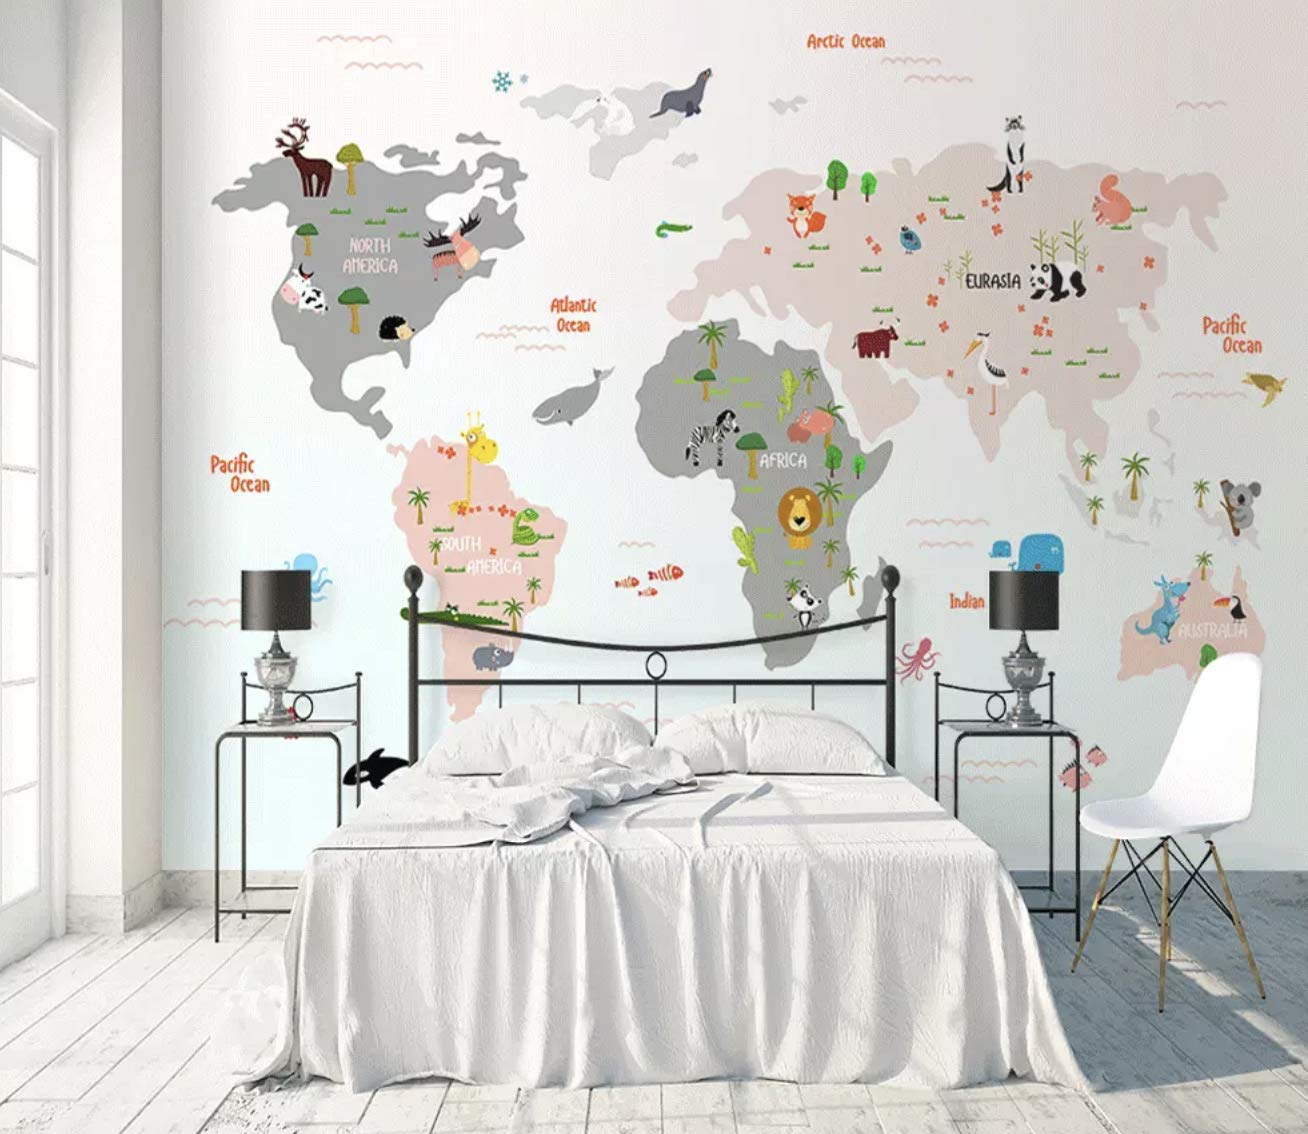 10 Best World Map for Kids 2022 - Buying Guide & Reviews 10